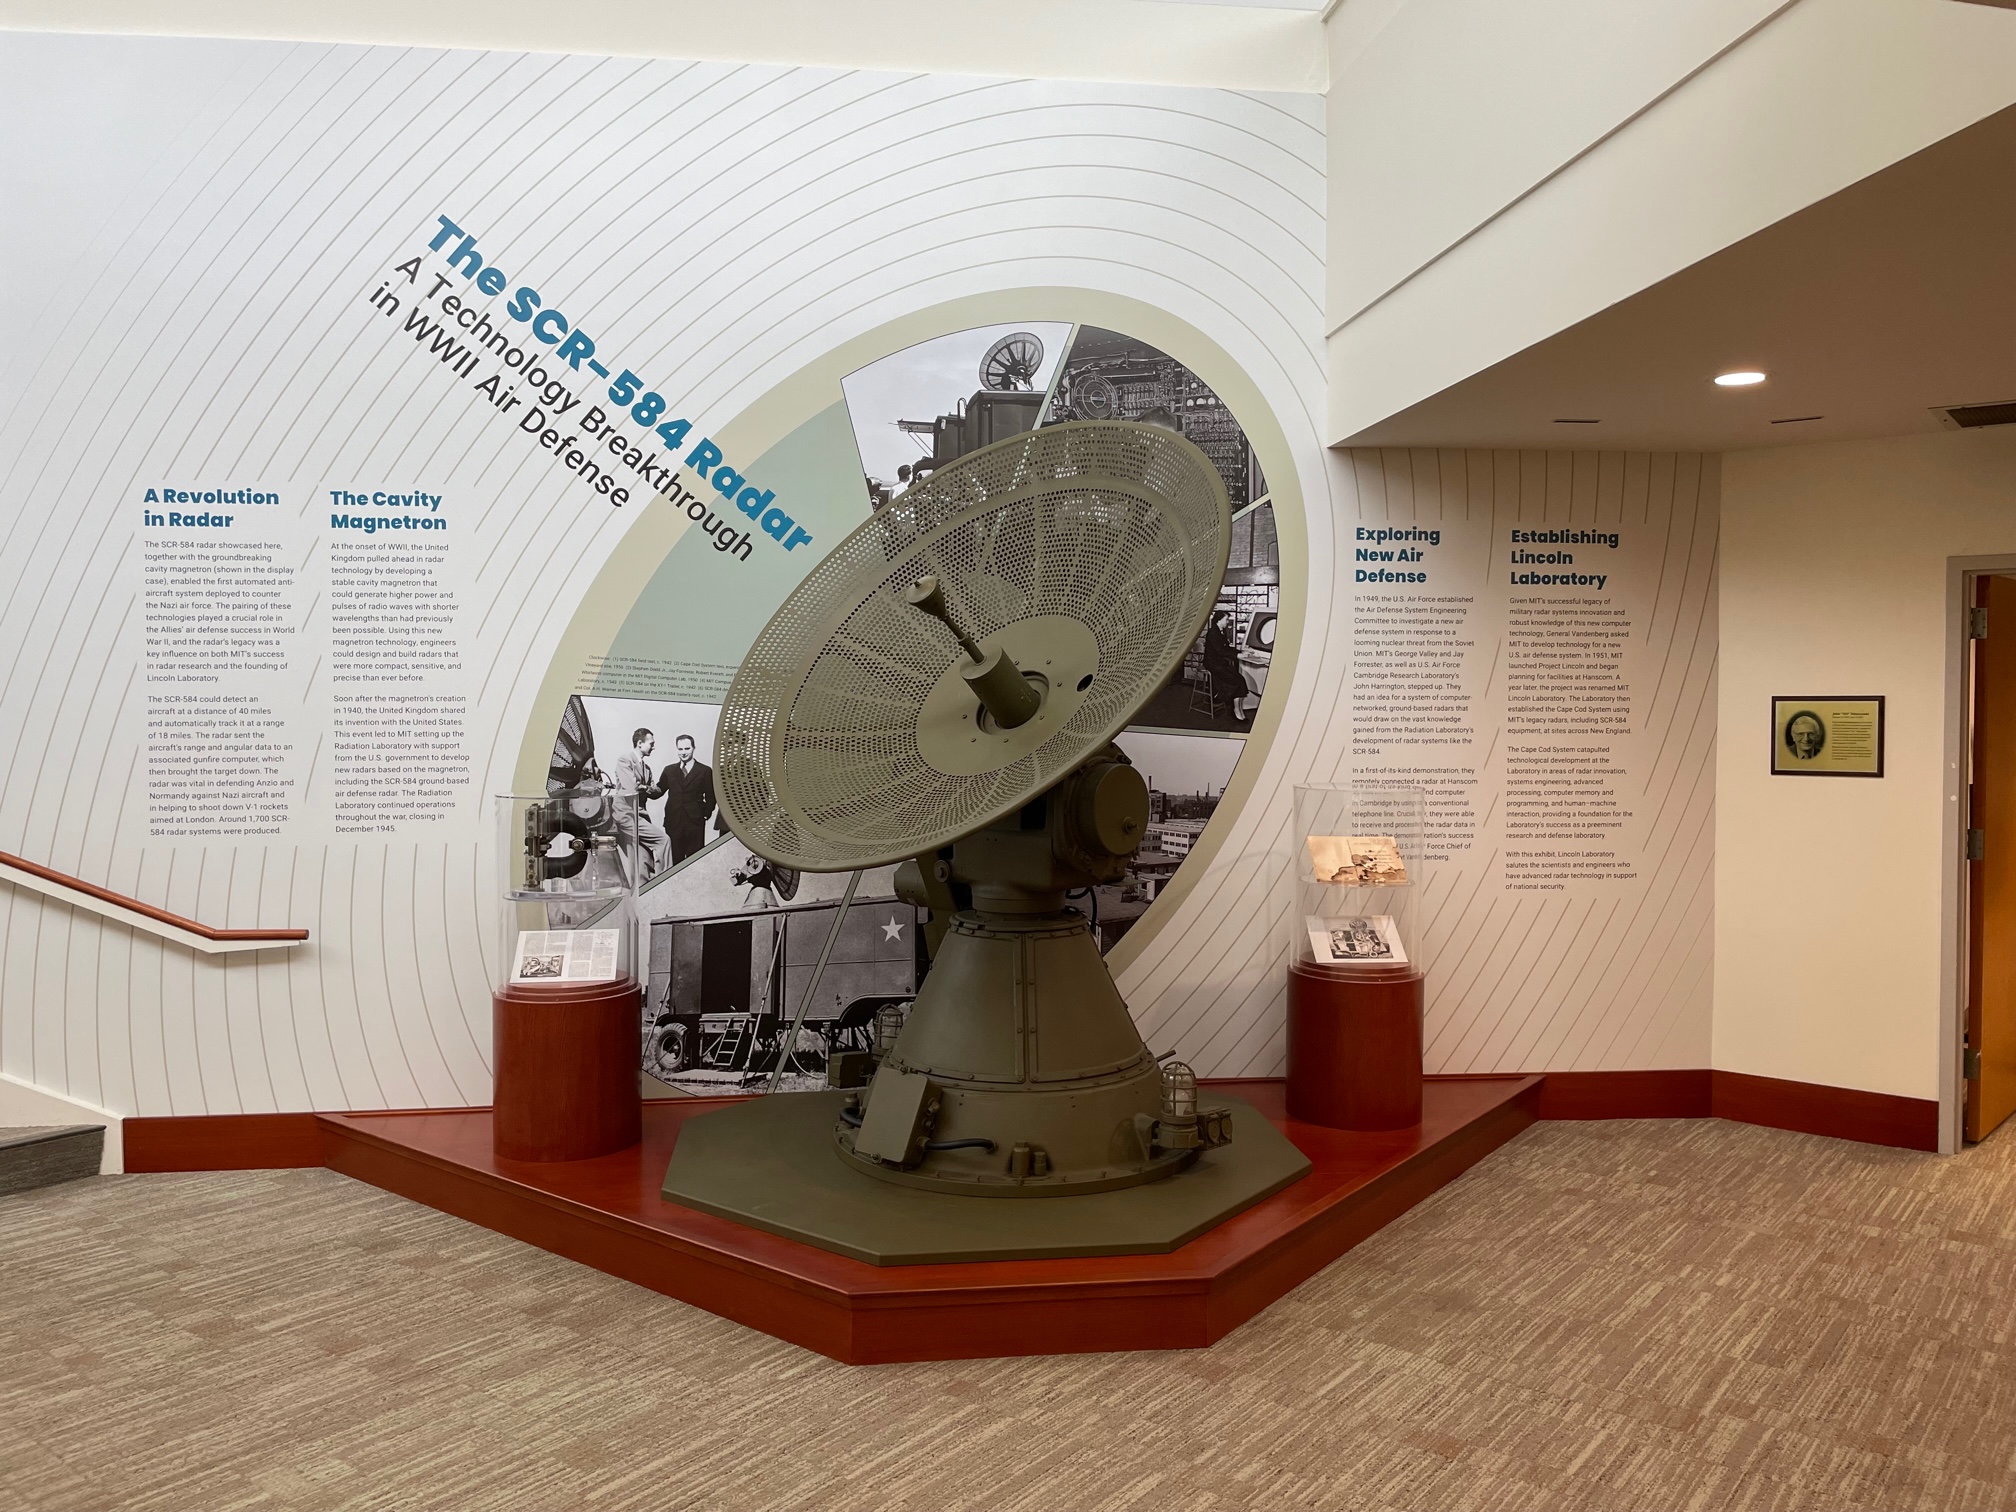 A photograph of the SCR-584 radar at Lincoln Laboratory in front of a wall of text about its development and use in World War II.